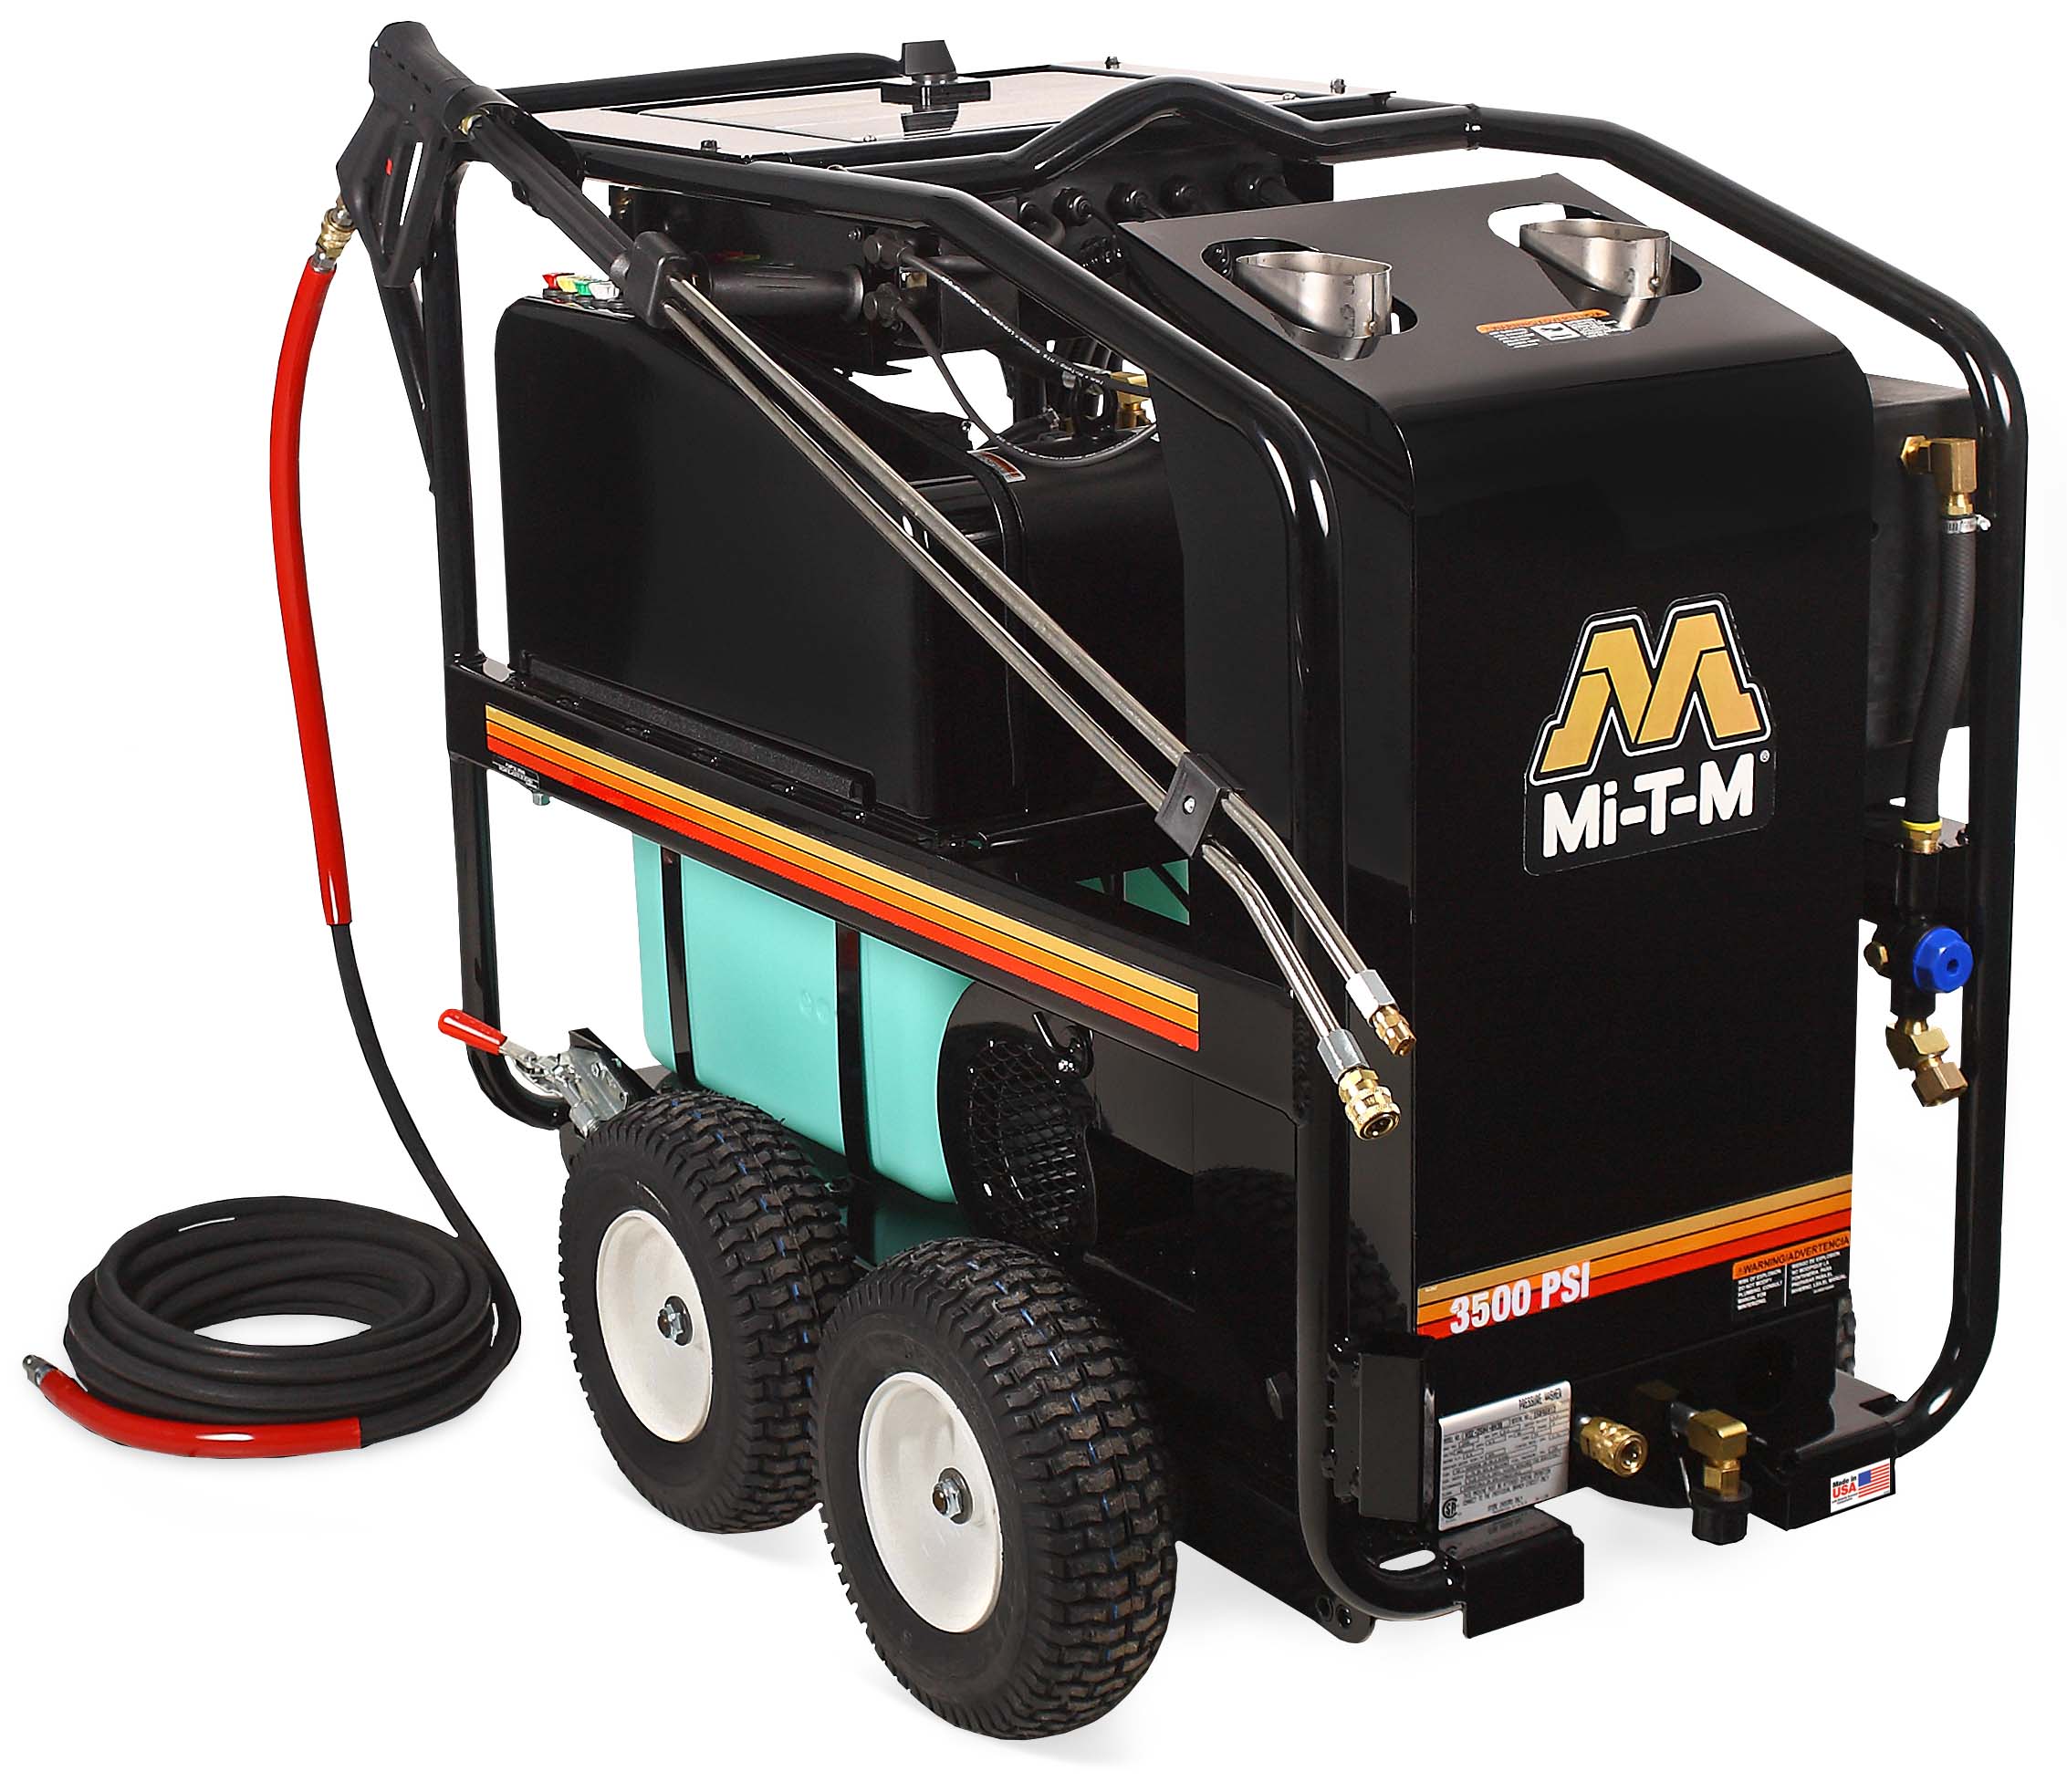 Hot Water Pressure Washers - Small Engine Solutions